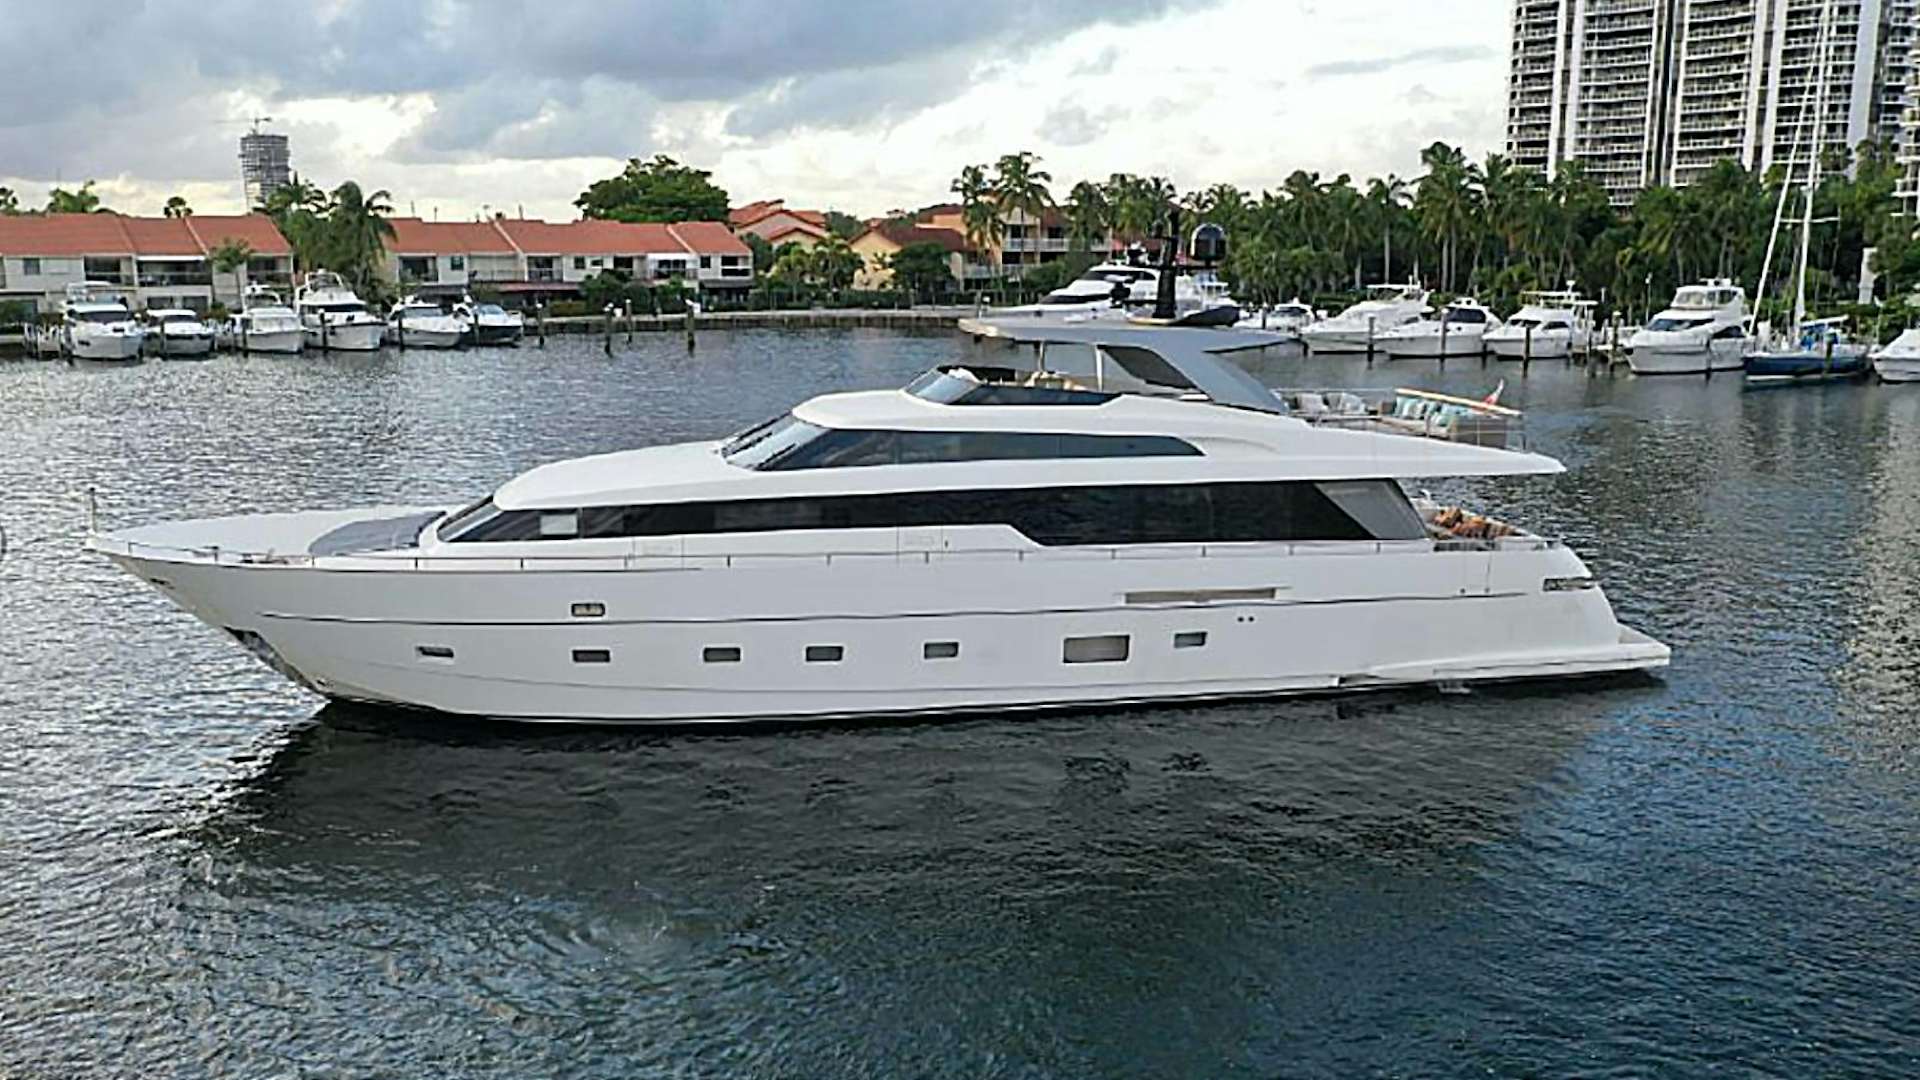 a yacht in the water aboard No Name Yacht for Sale